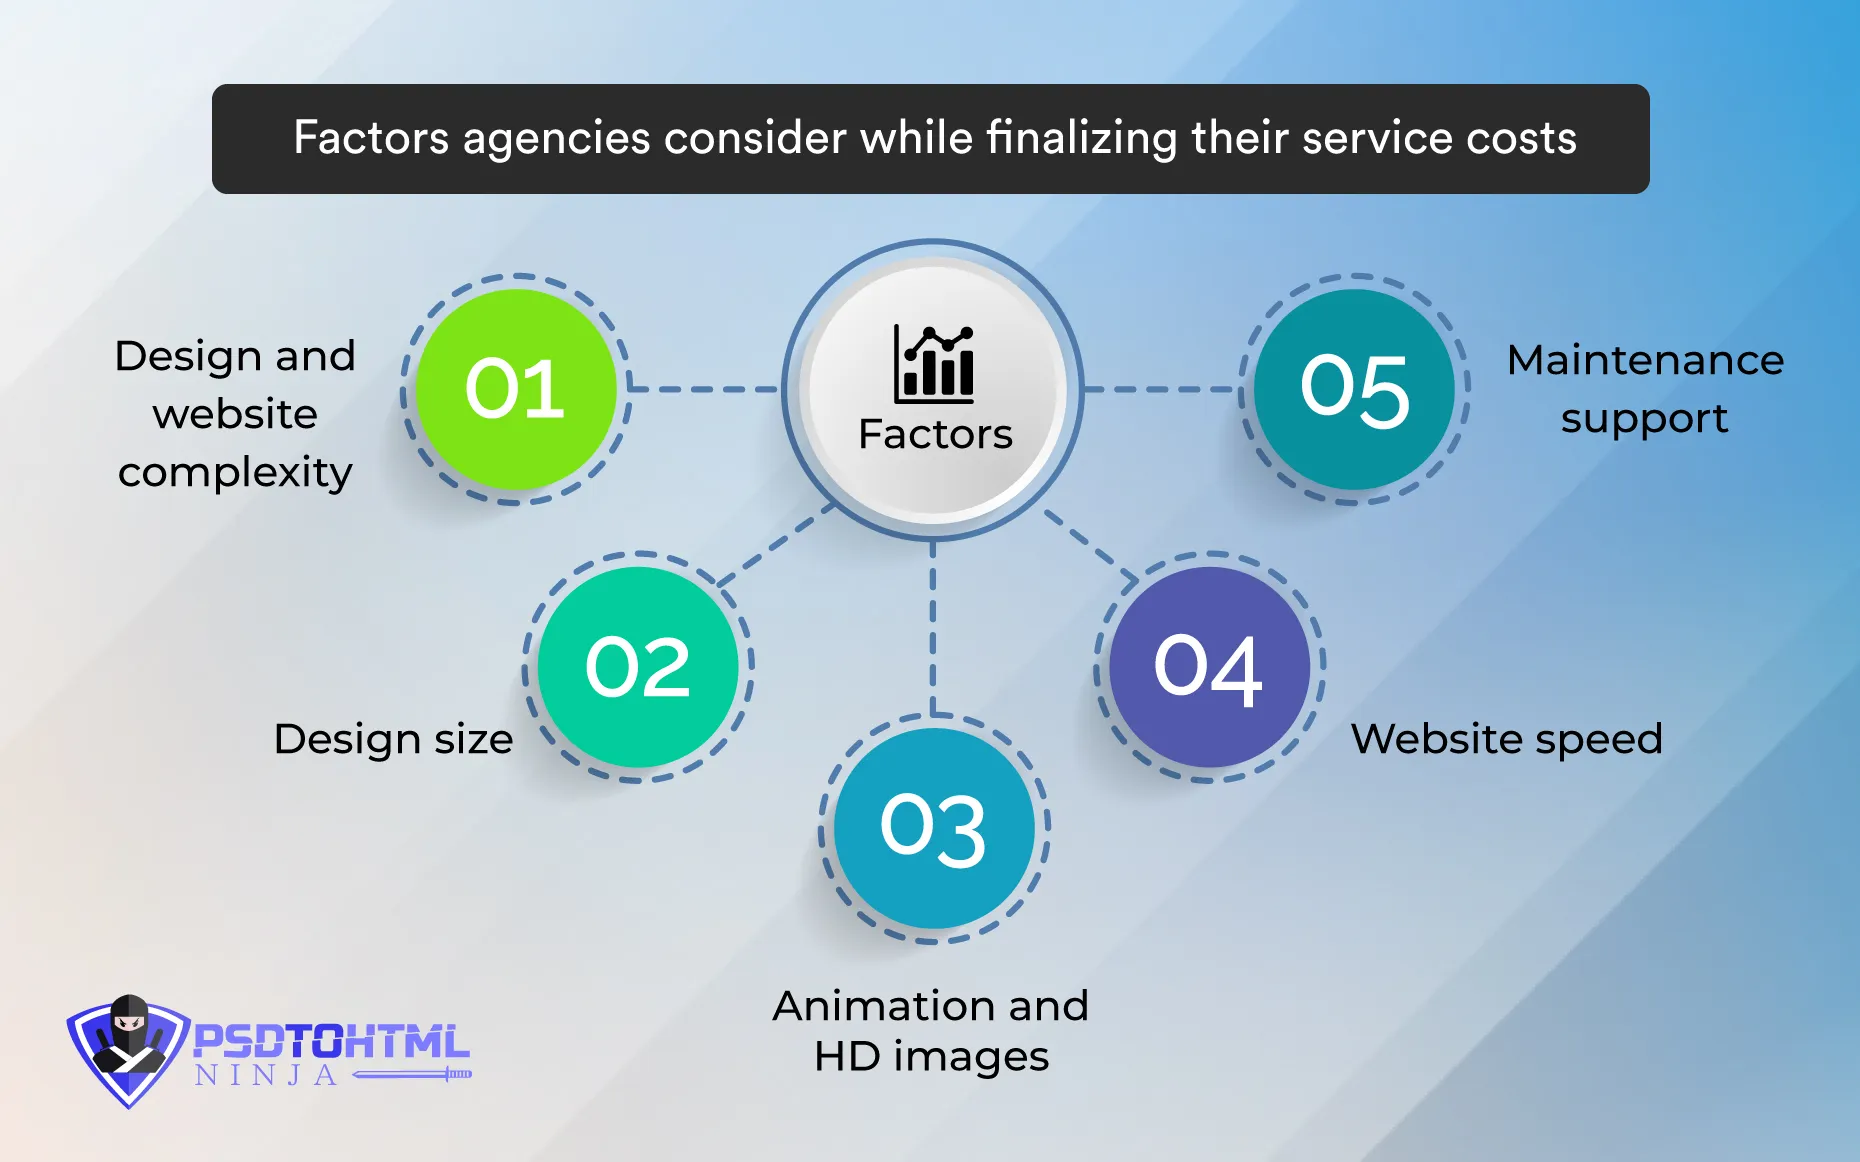 Factors agencies consider while finalizing their service costs